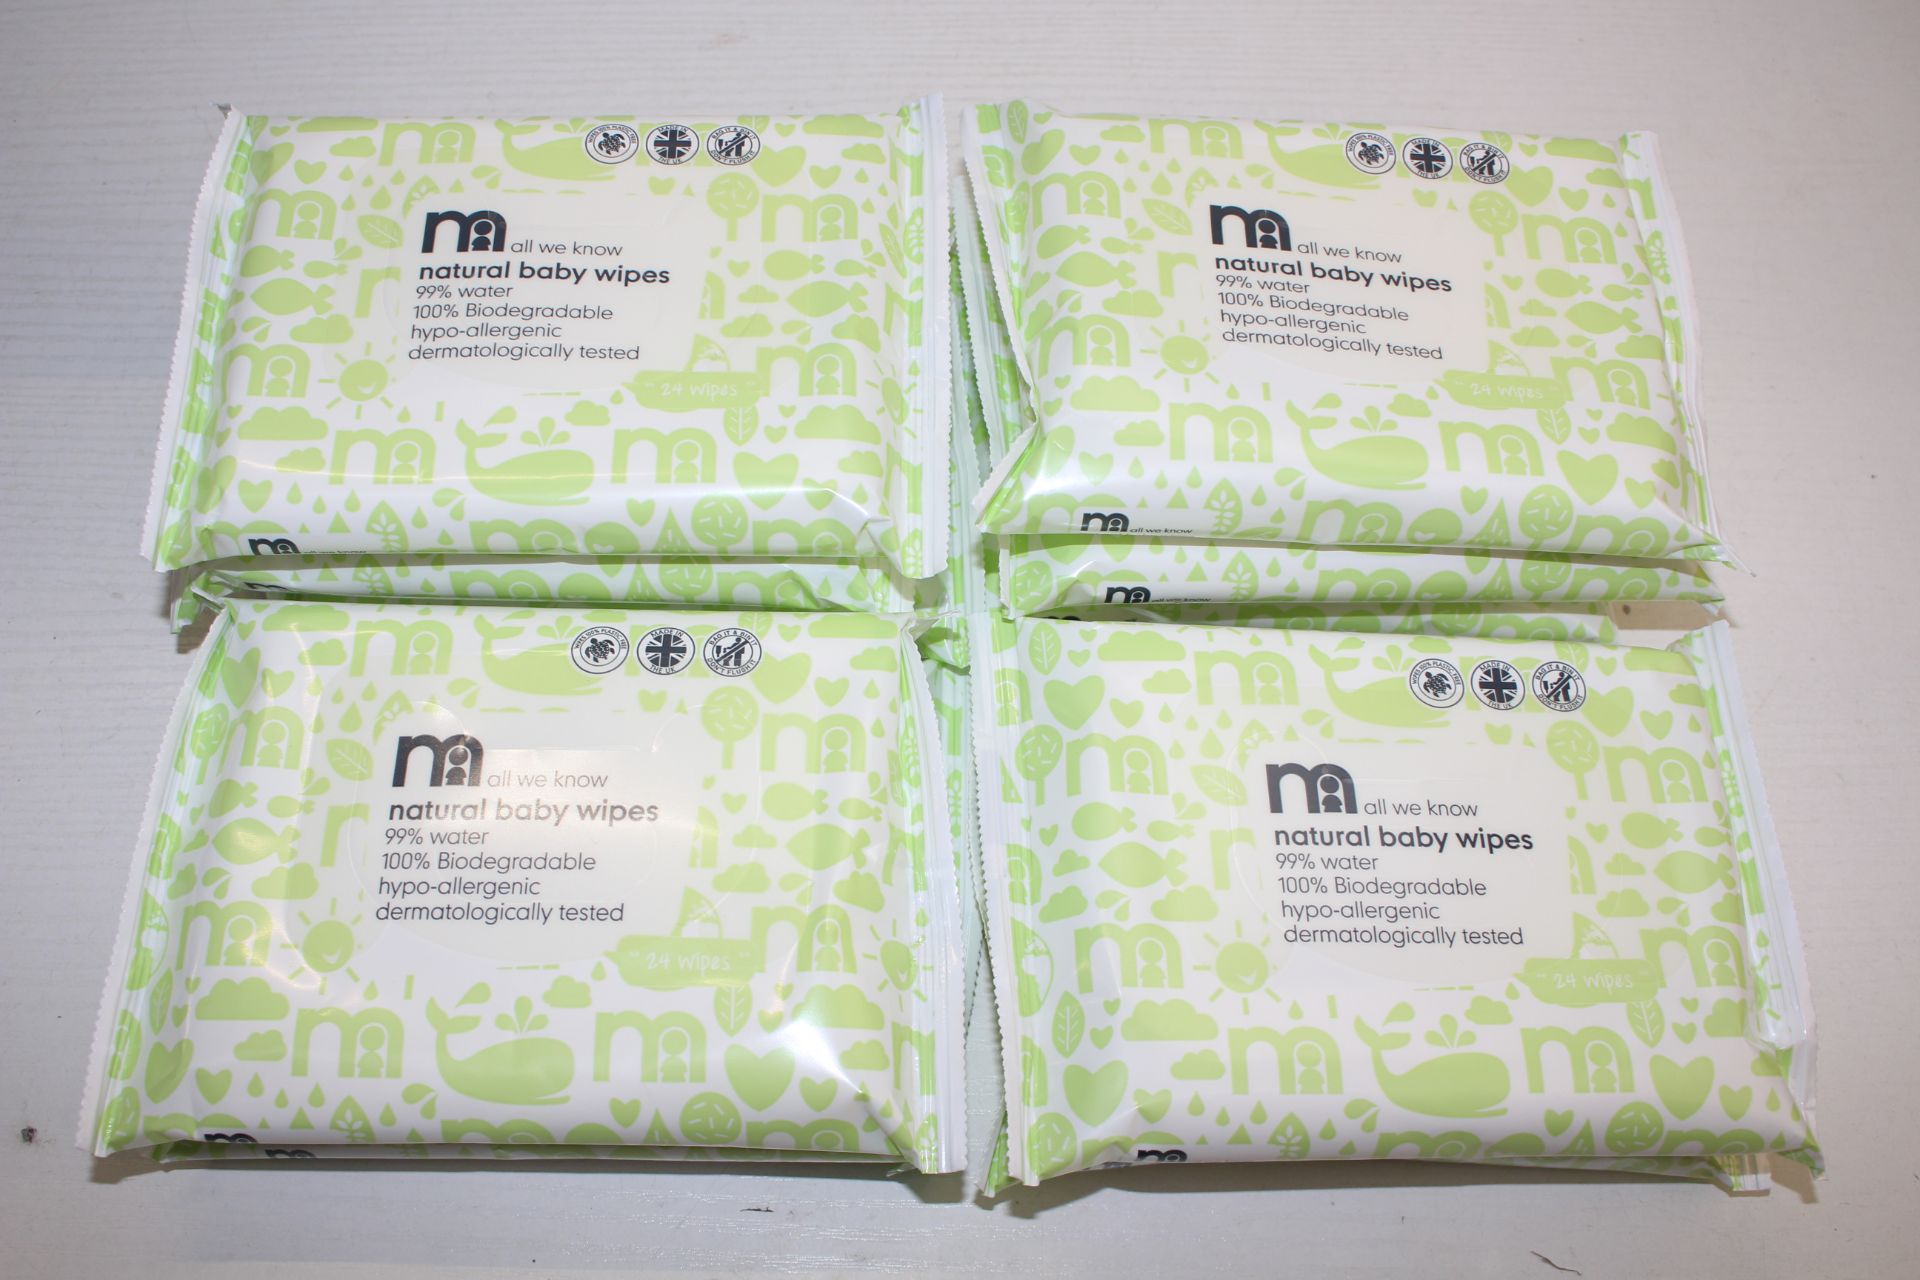 10X PACKS MOTHERCARE ALL WE KNOW - NATURAL BABY WIPES 24PACKS HYPO-ALLERGENICCondition